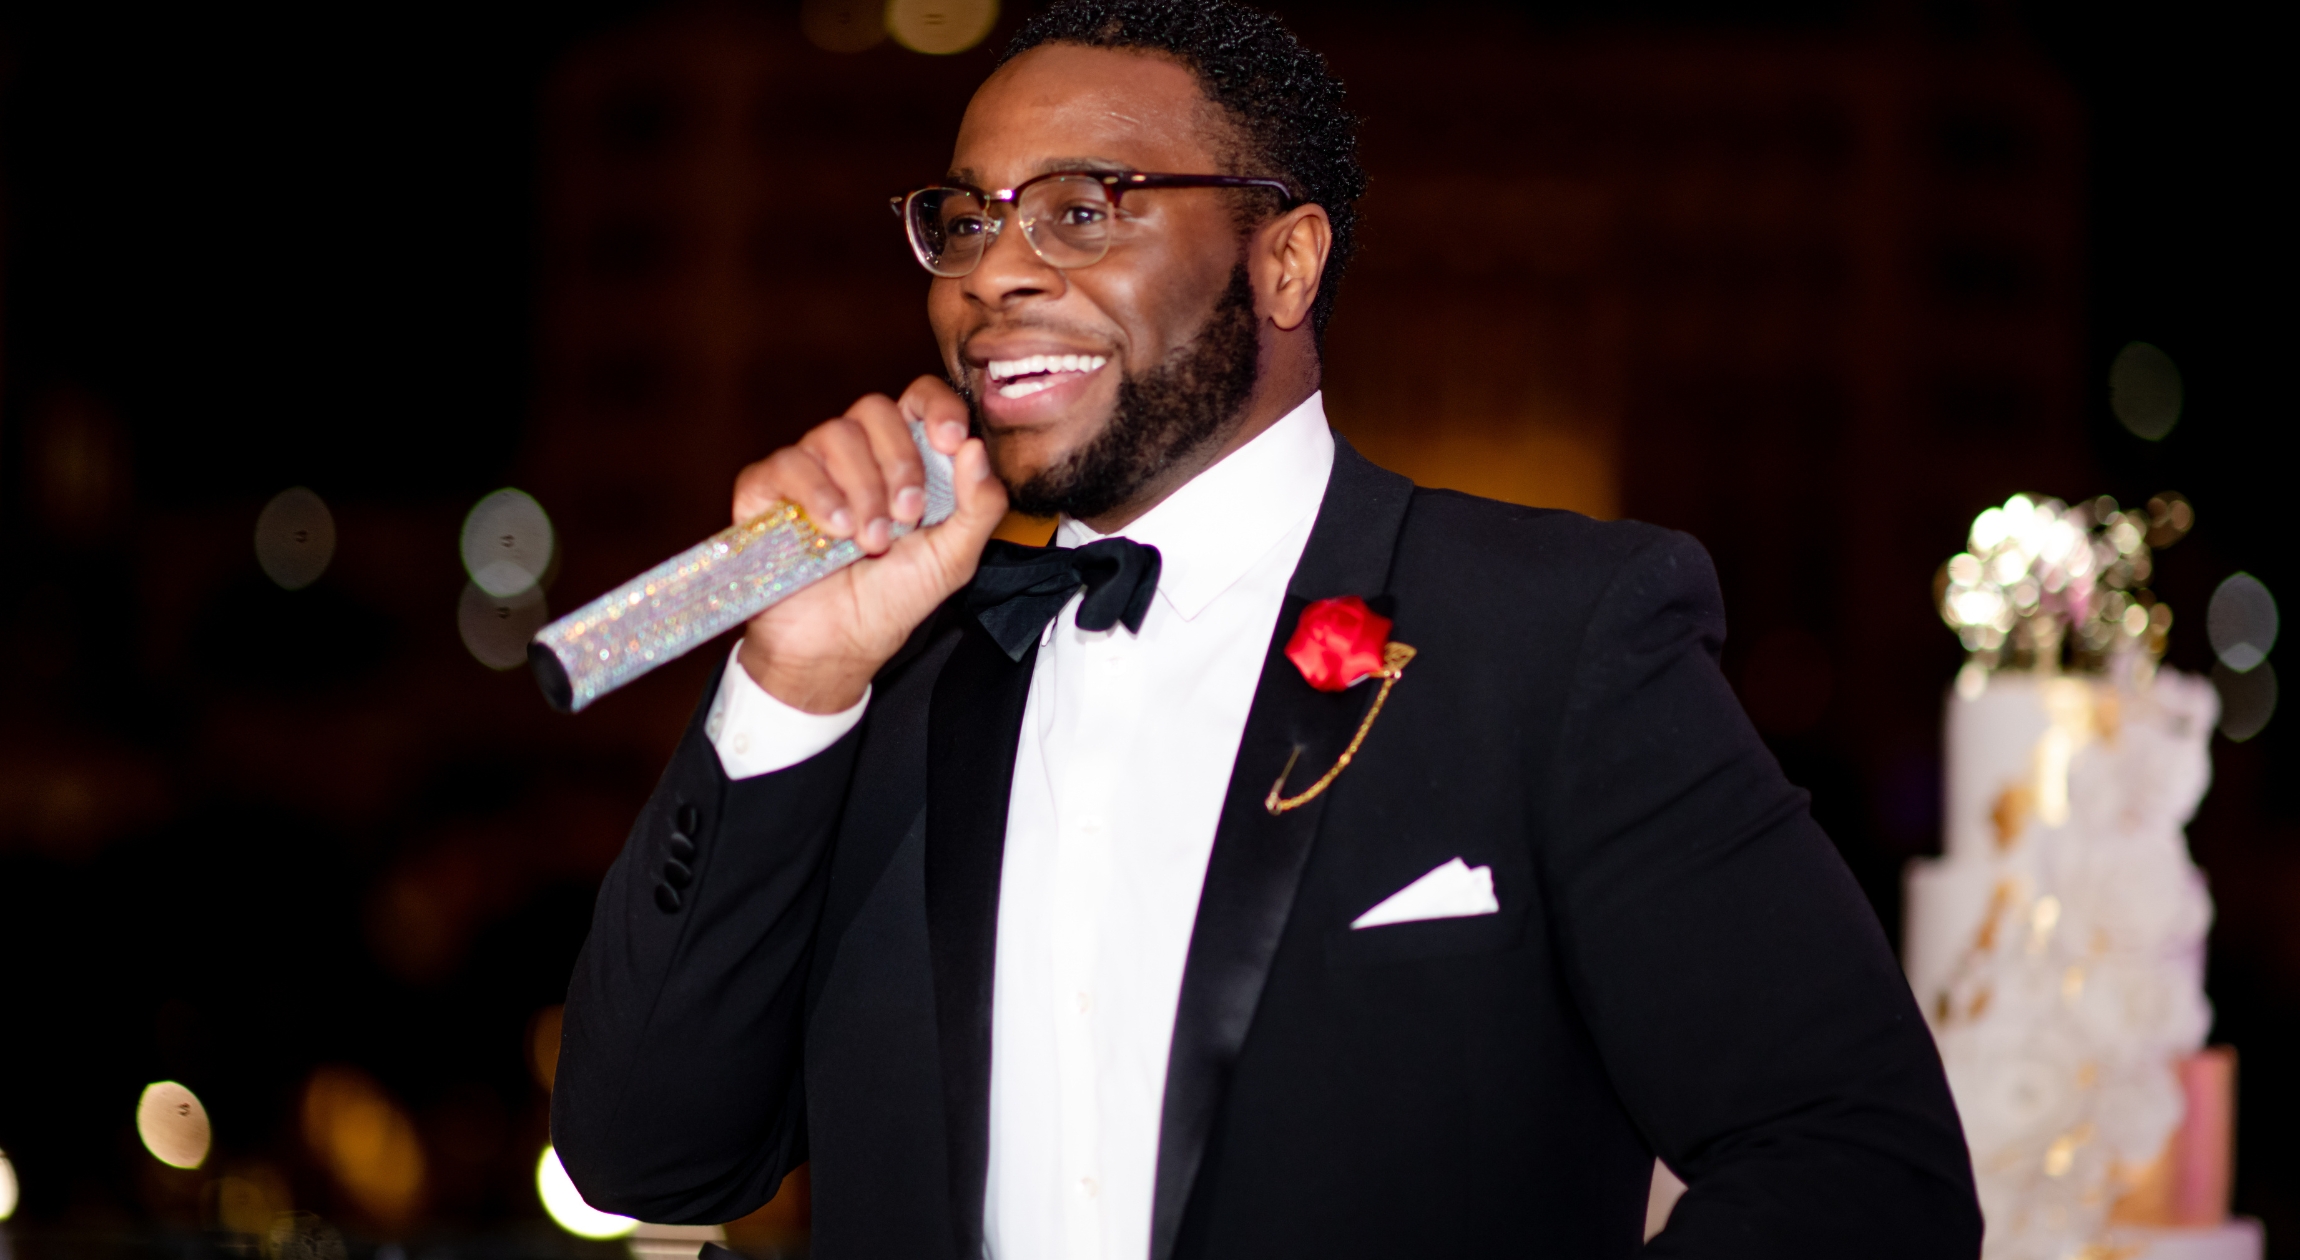 A Black man in a tuxedo holding a microphone